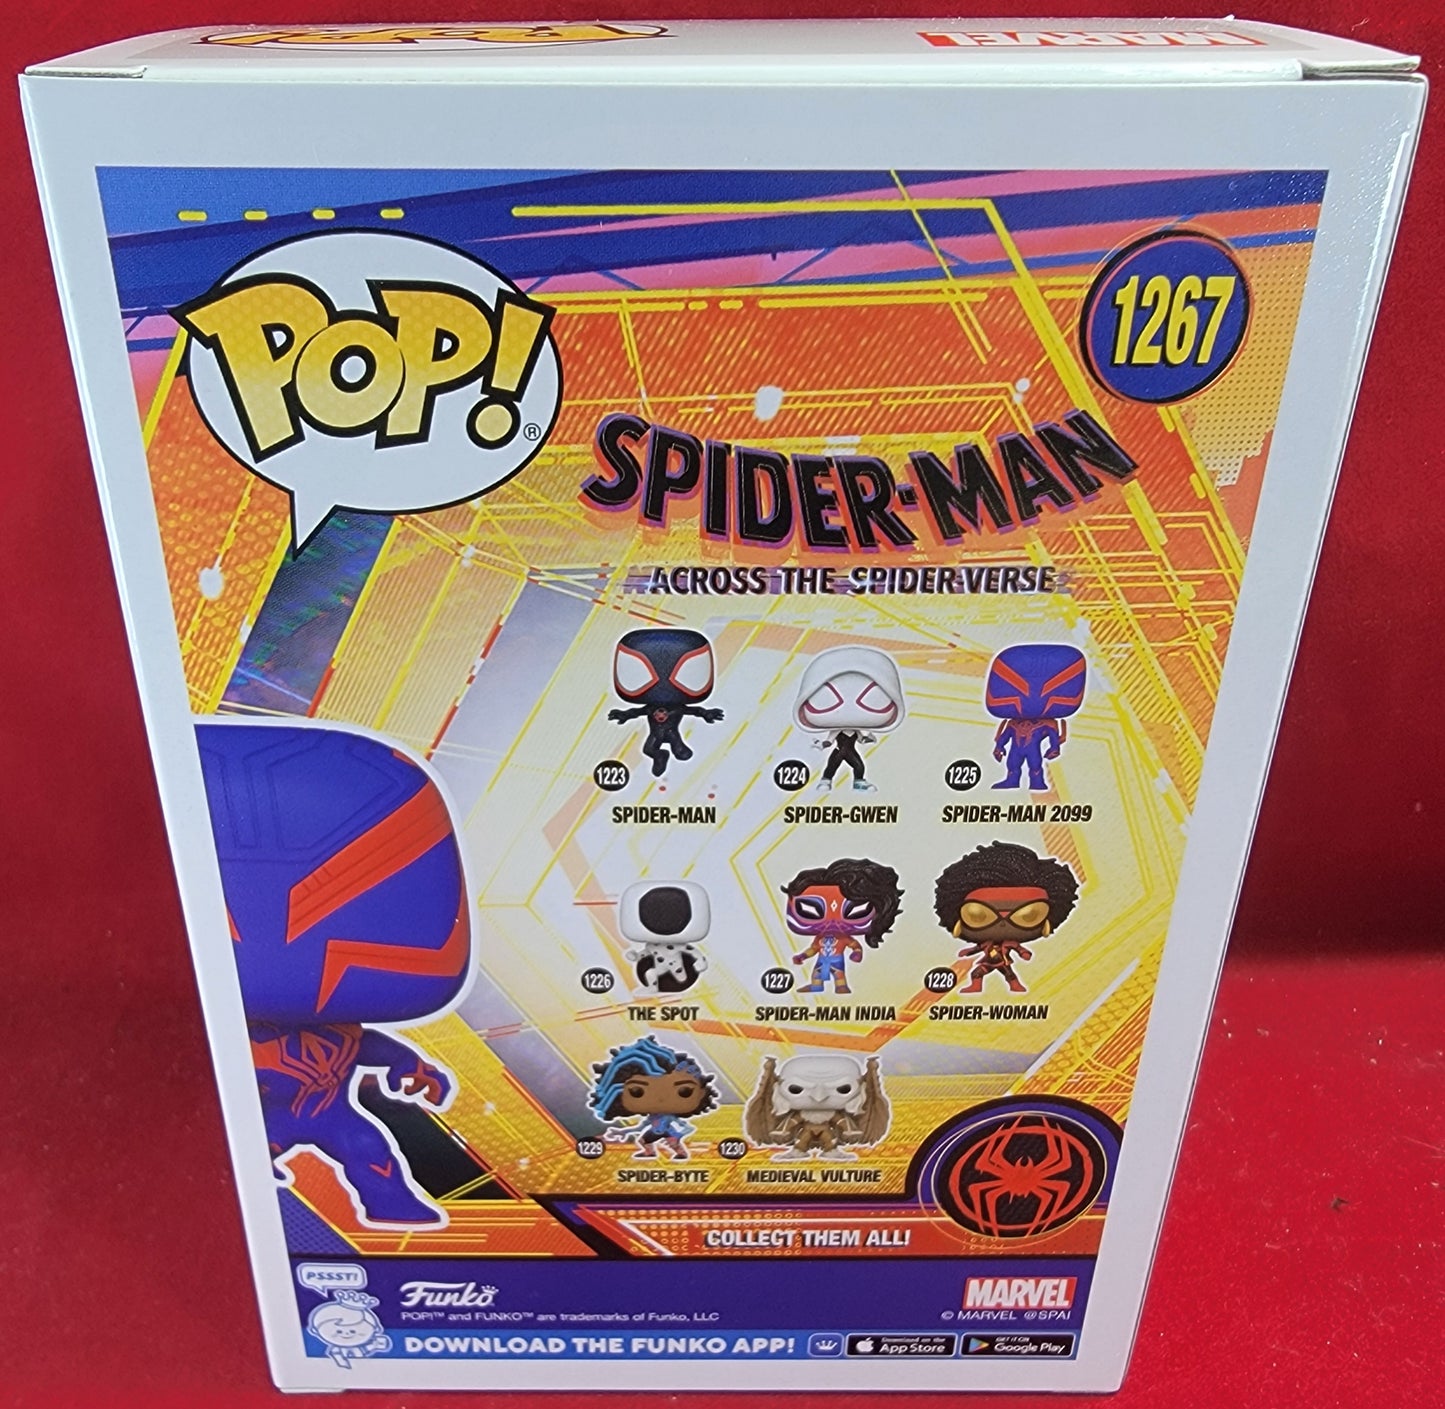 Spider-Man 2099 entertainment earth funko # 1267 (nib)
With pop protector